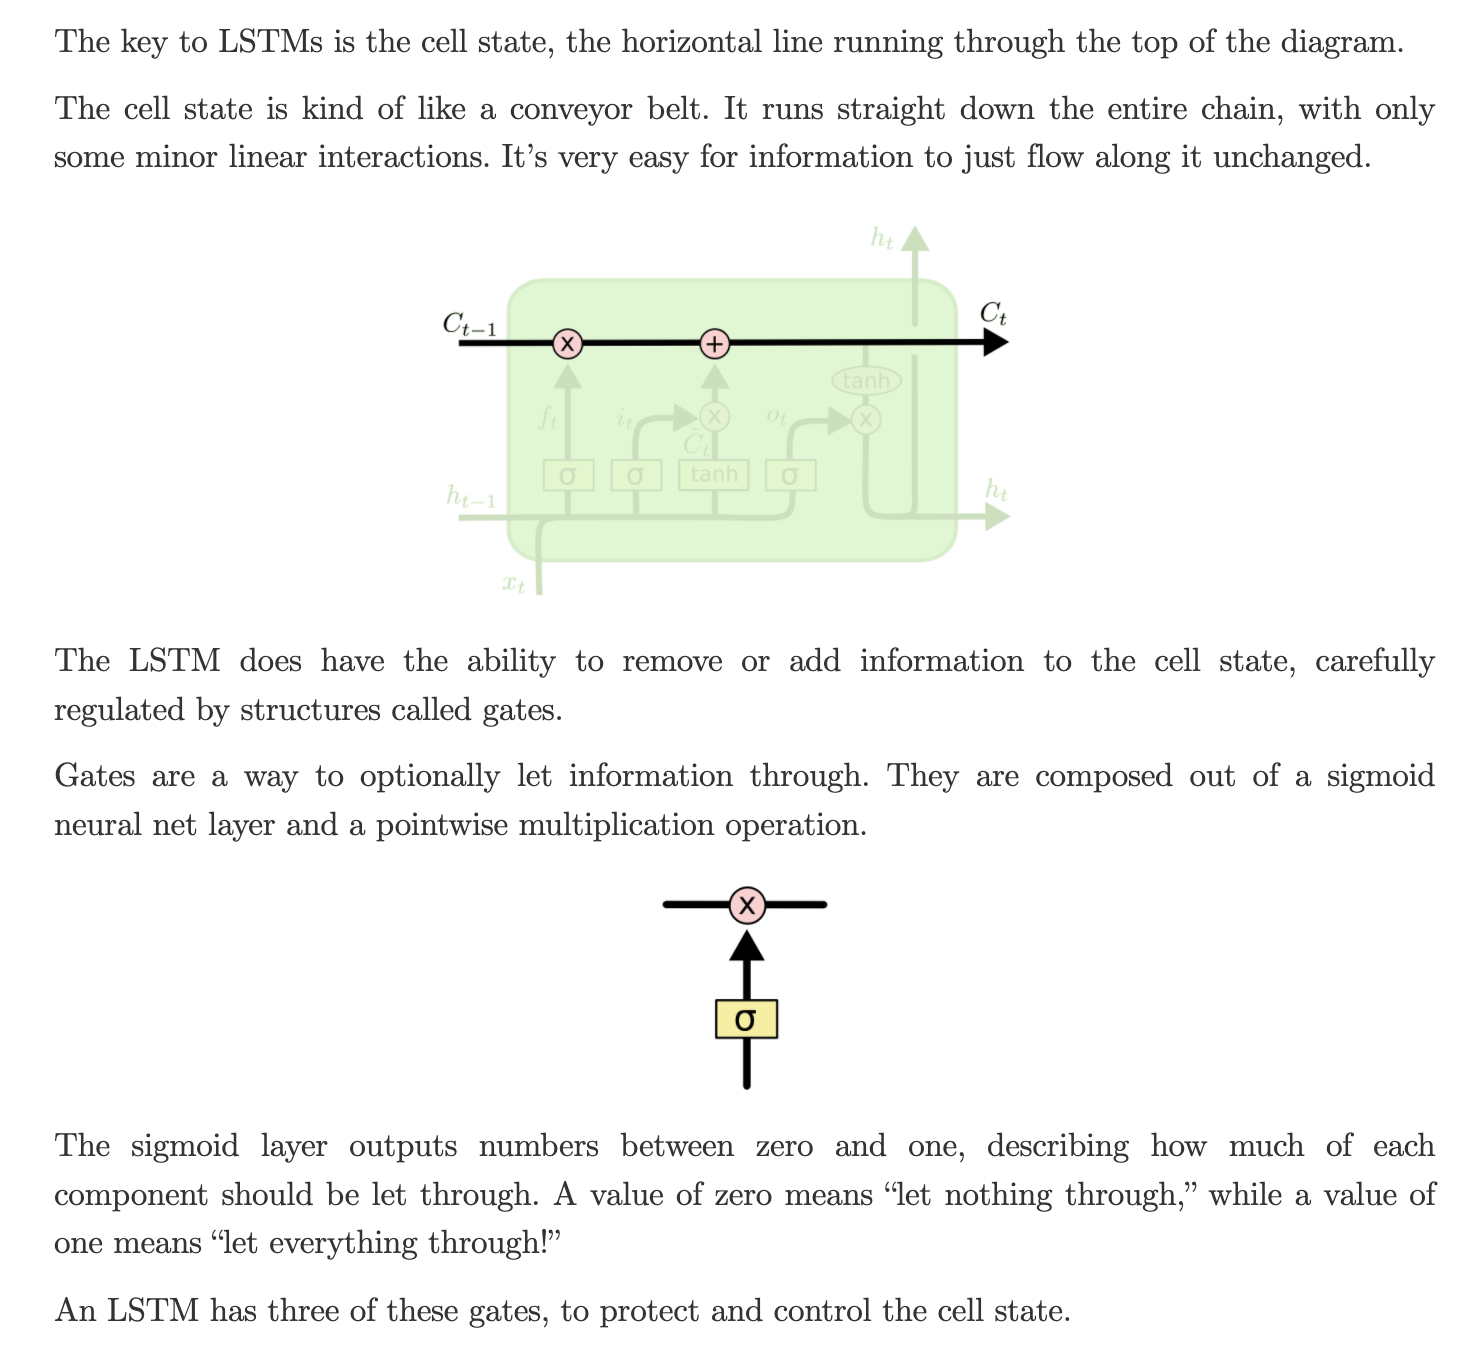 ../../_images/LSTM_cell_state_layer.png